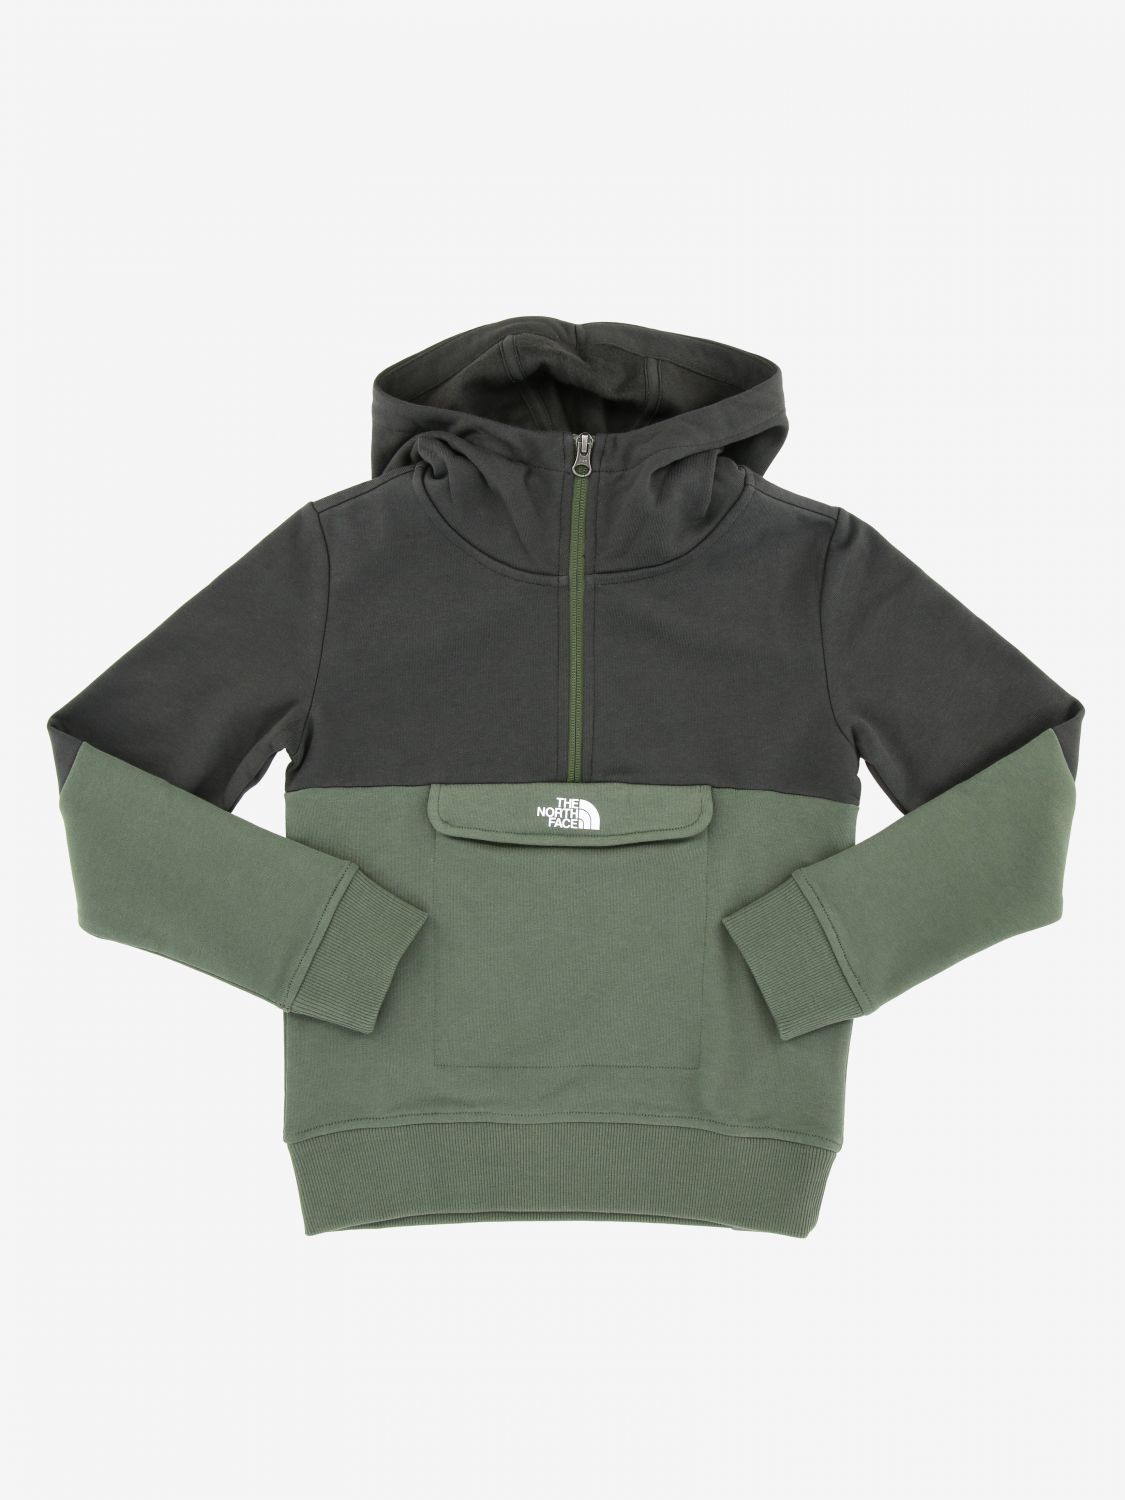 north face kids sweater